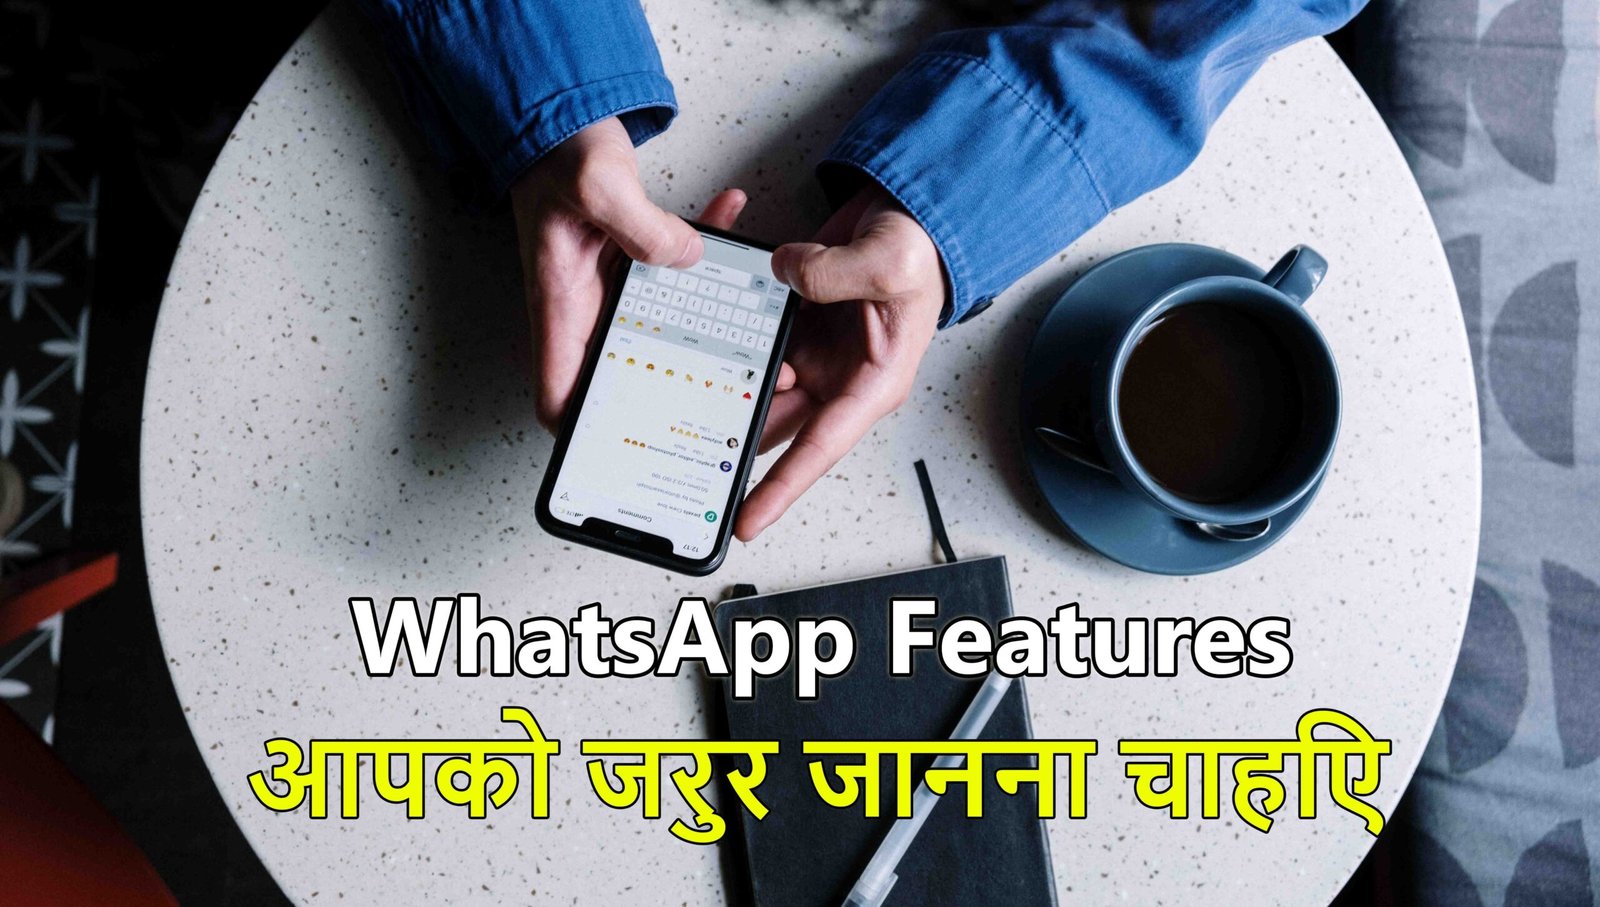 WhatsApp Top 5 Features